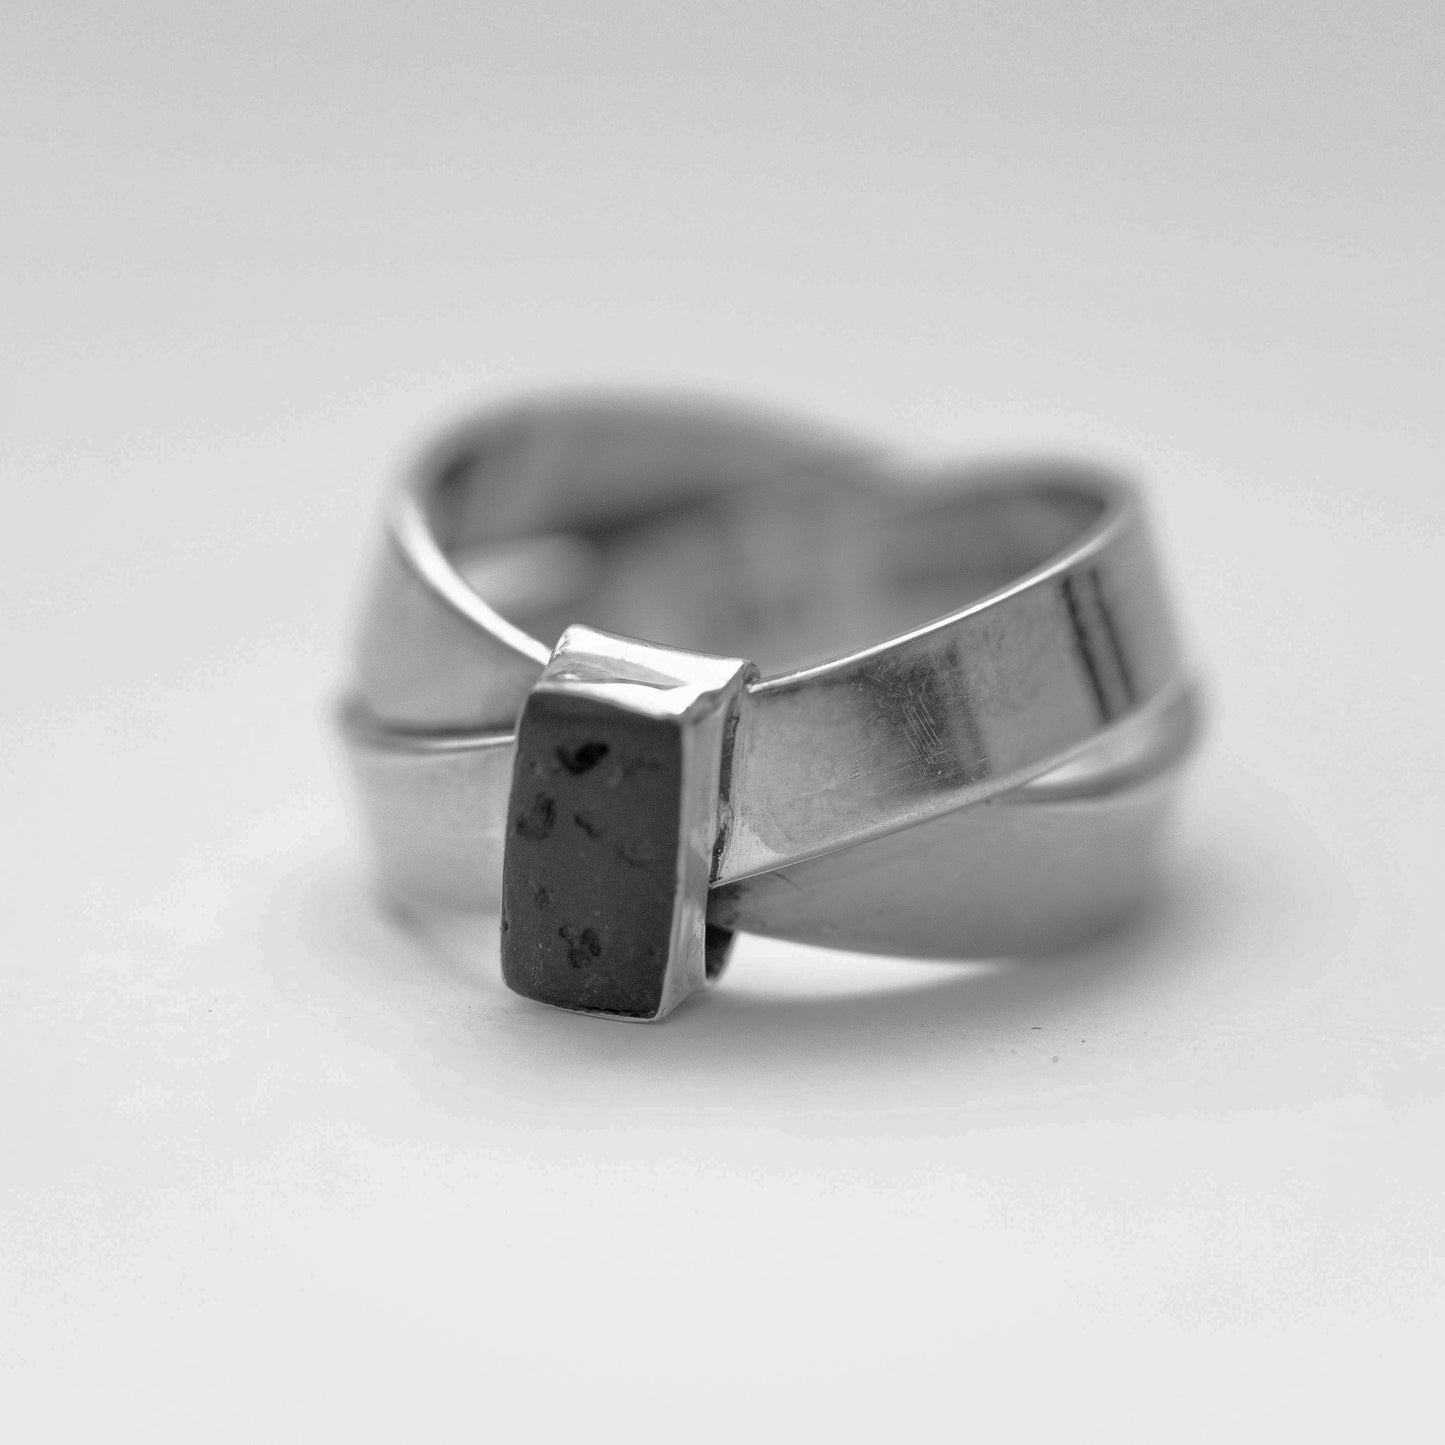 Kaldera Atelier Bhu Ring in 925 Sterling Silver and Mount Agung Lava Stone.